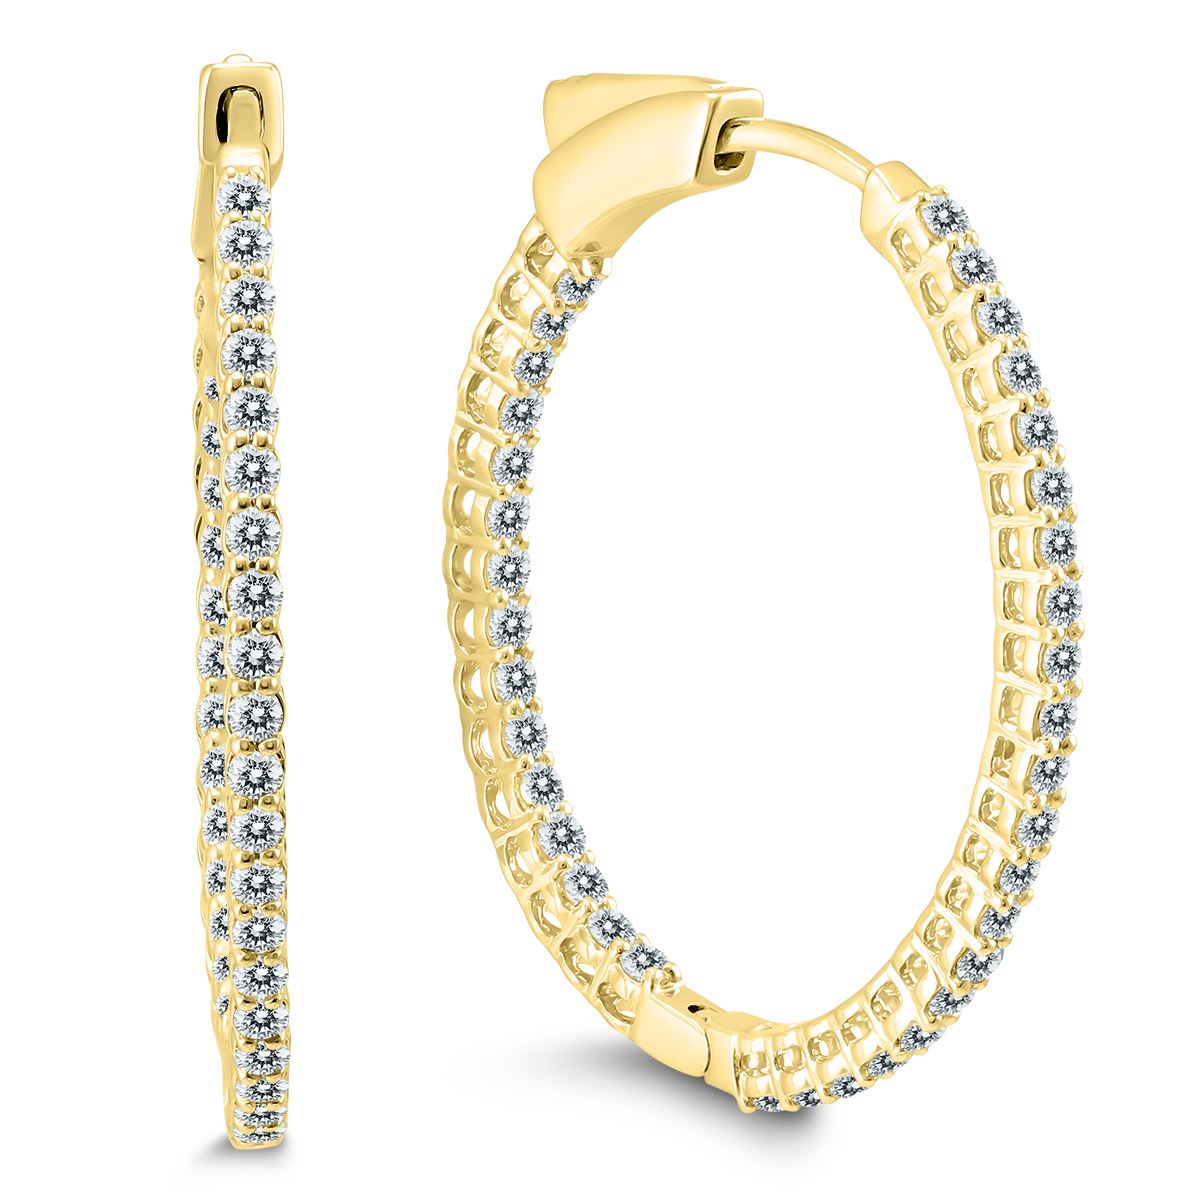 1 Carat TW Round Diamond Hoop Earrings with Push Down Button Locks in 10K Yellow Gold